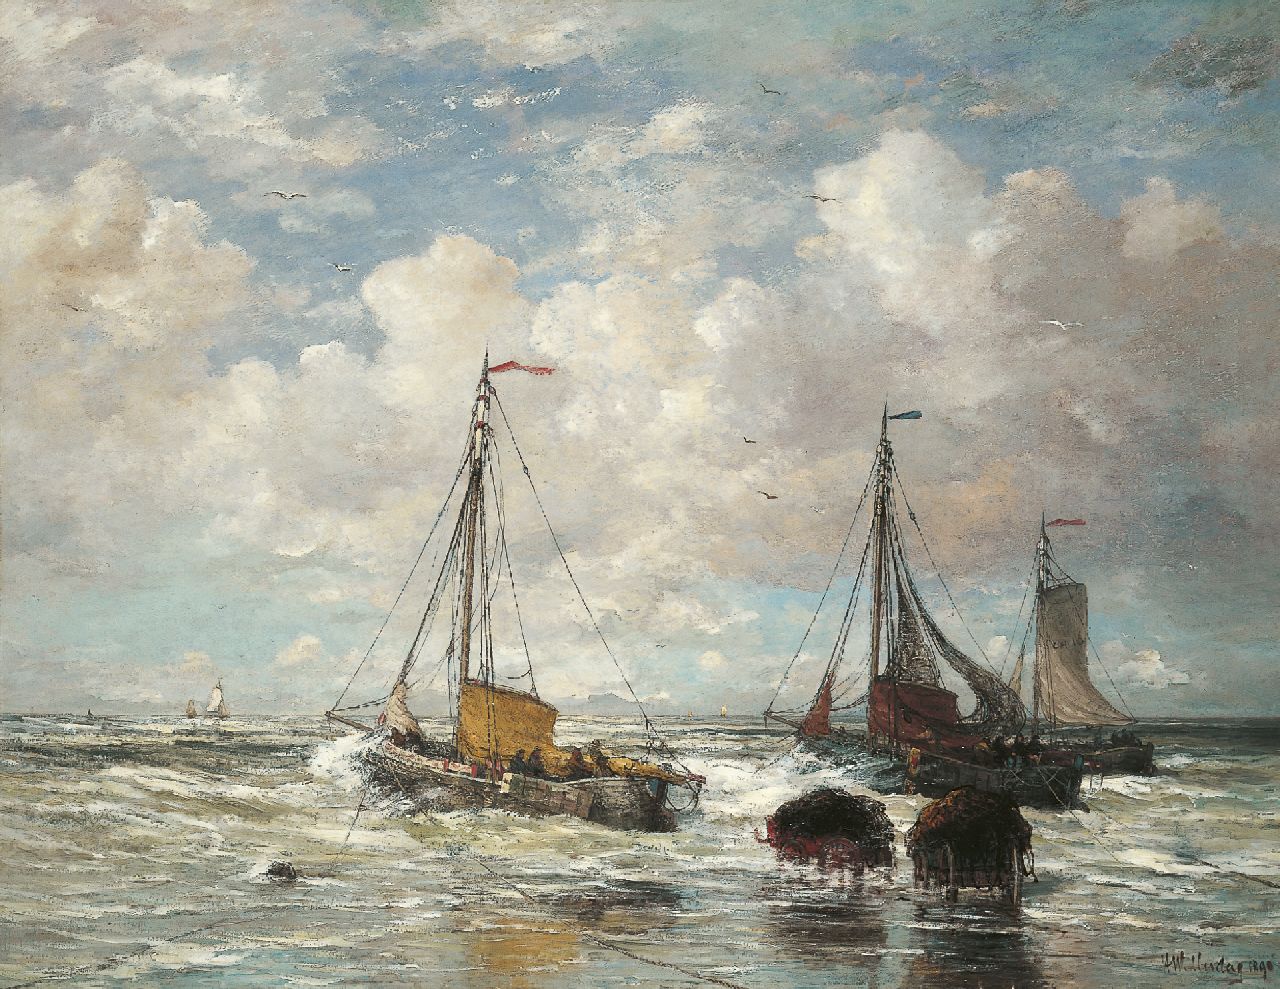 Mesdag H.W.  | Hendrik Willem Mesdag, The departure of the fleet, Scheveningen, oil on canvas 138.7 x 178.6 cm, signed l.r. and dated 1890